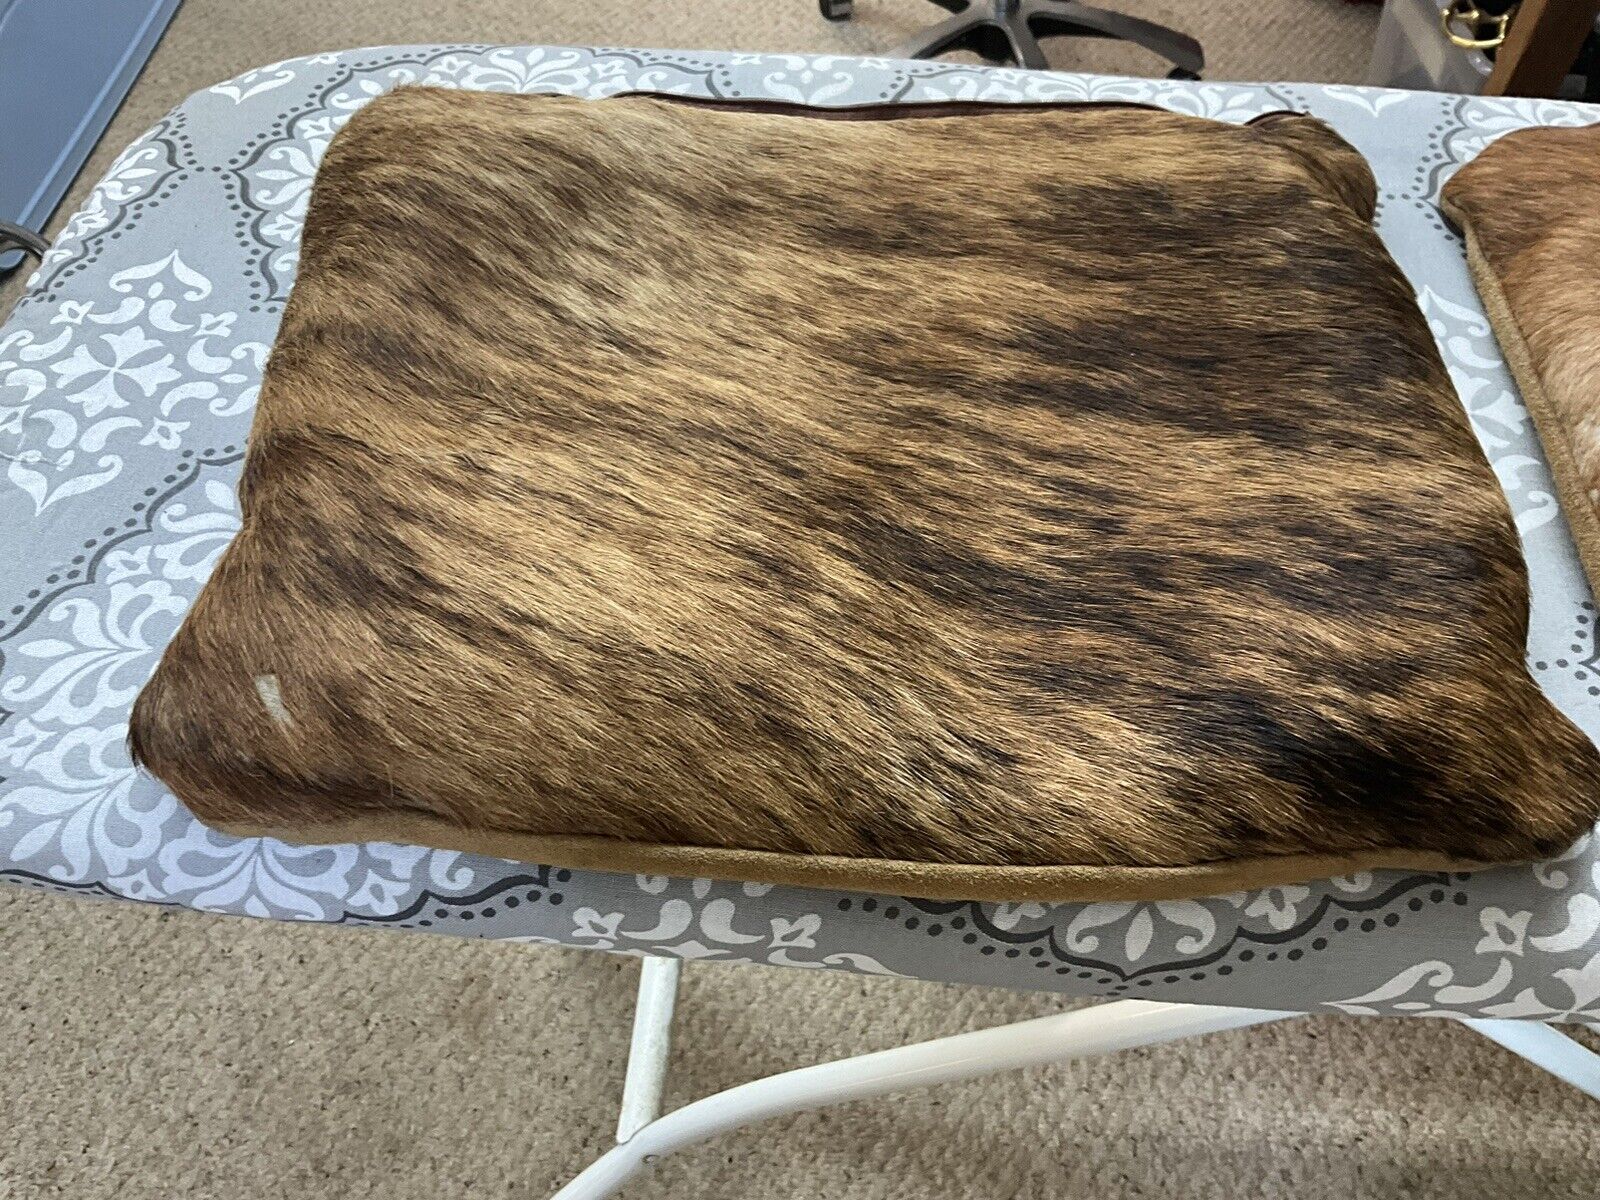 Pair Of Real Fur Pillow Covers 15x13 Leather Inside On One Side Vintage Preowned